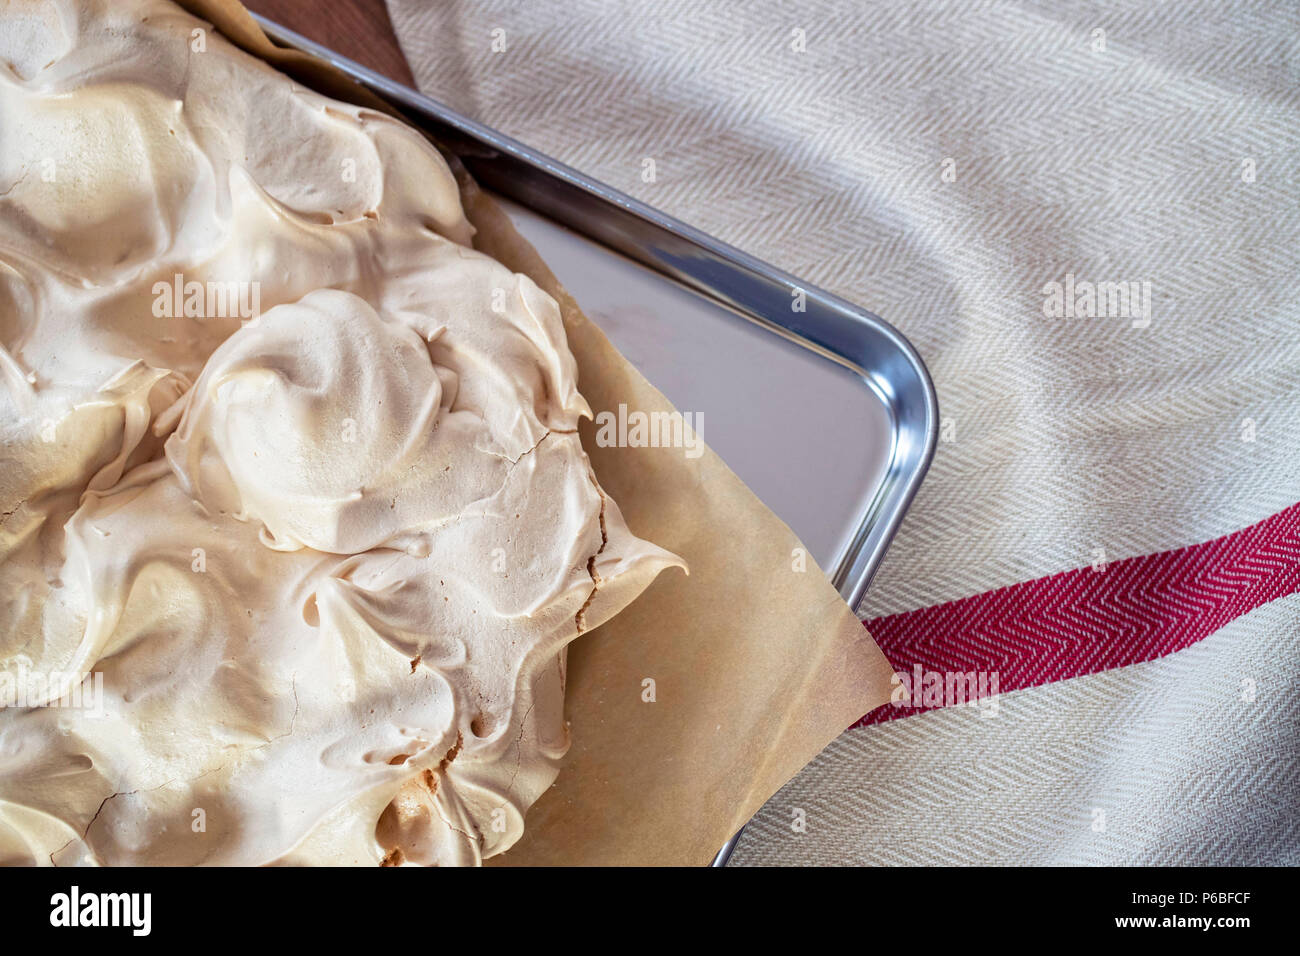 Cooking the meringue base for a Pavlova dessert. Fresh meringue, with crisp golden top, on baking parchment and a stainless steel baking tray. Overhea Stock Photo